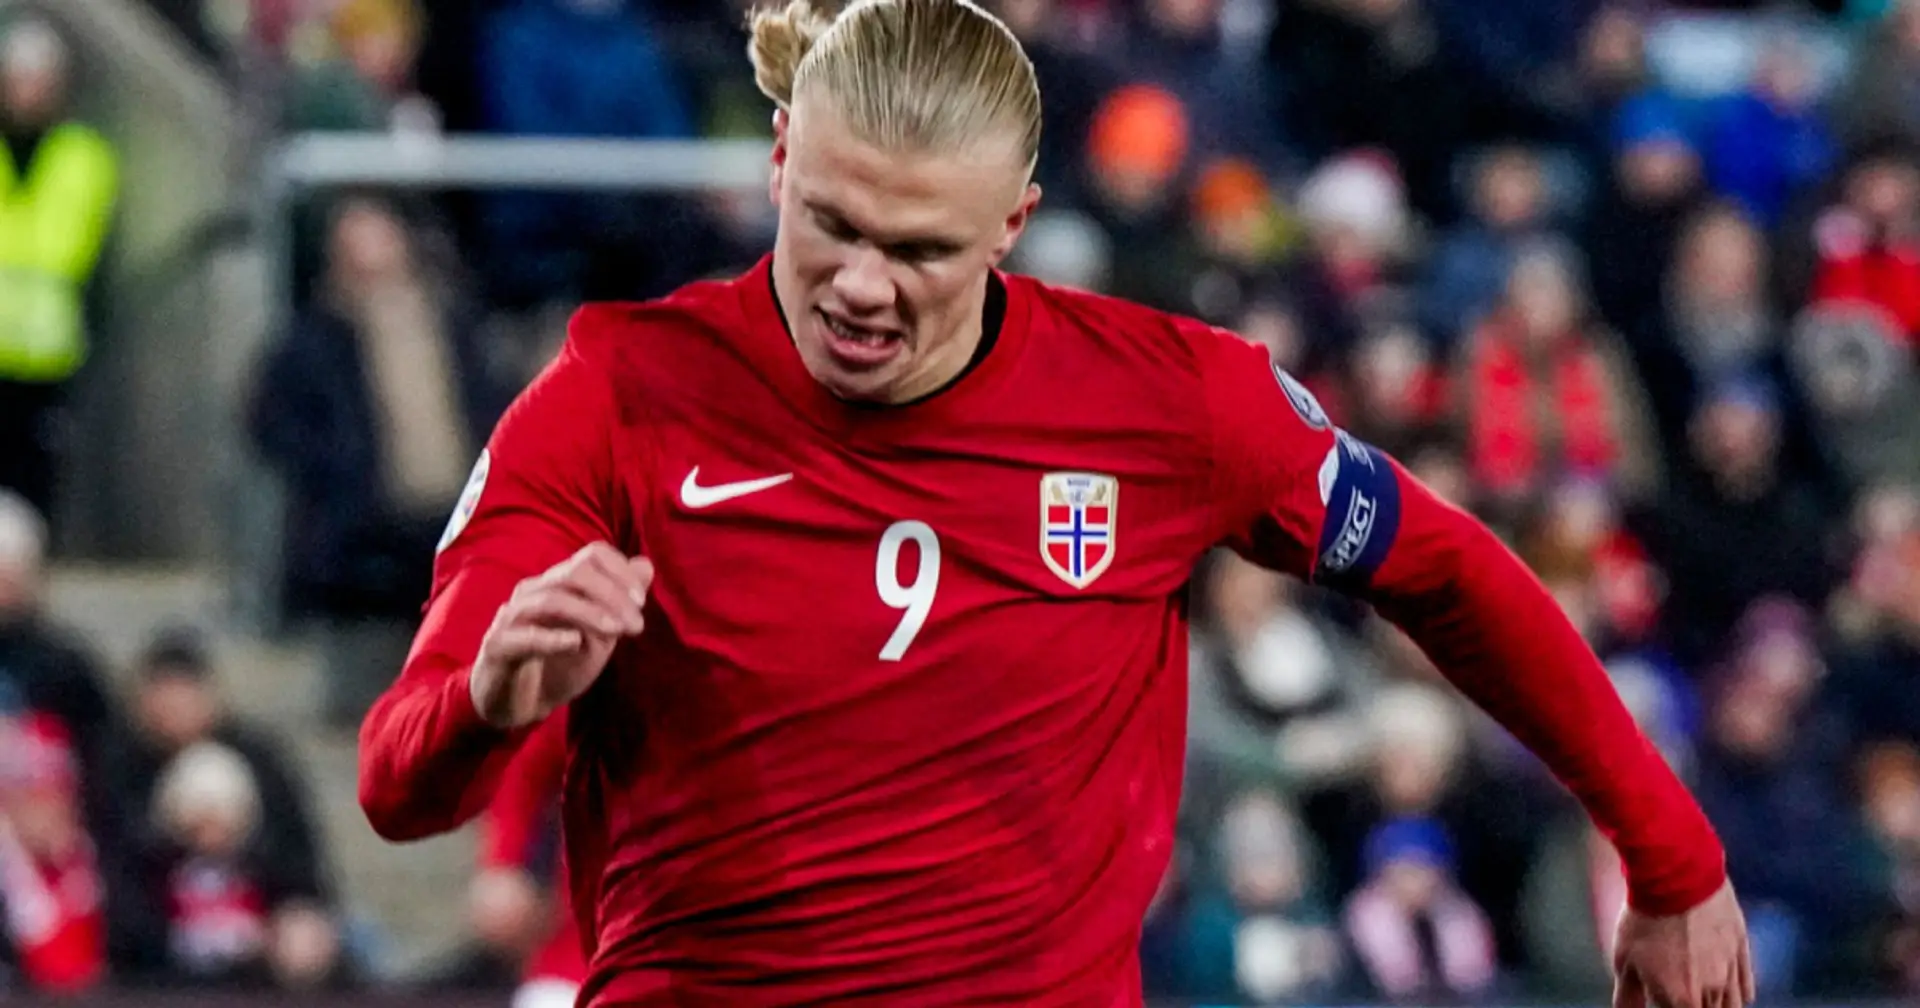 Erling Haaland withdraws from Norway squad, provides injury update ahead of Liverpool game